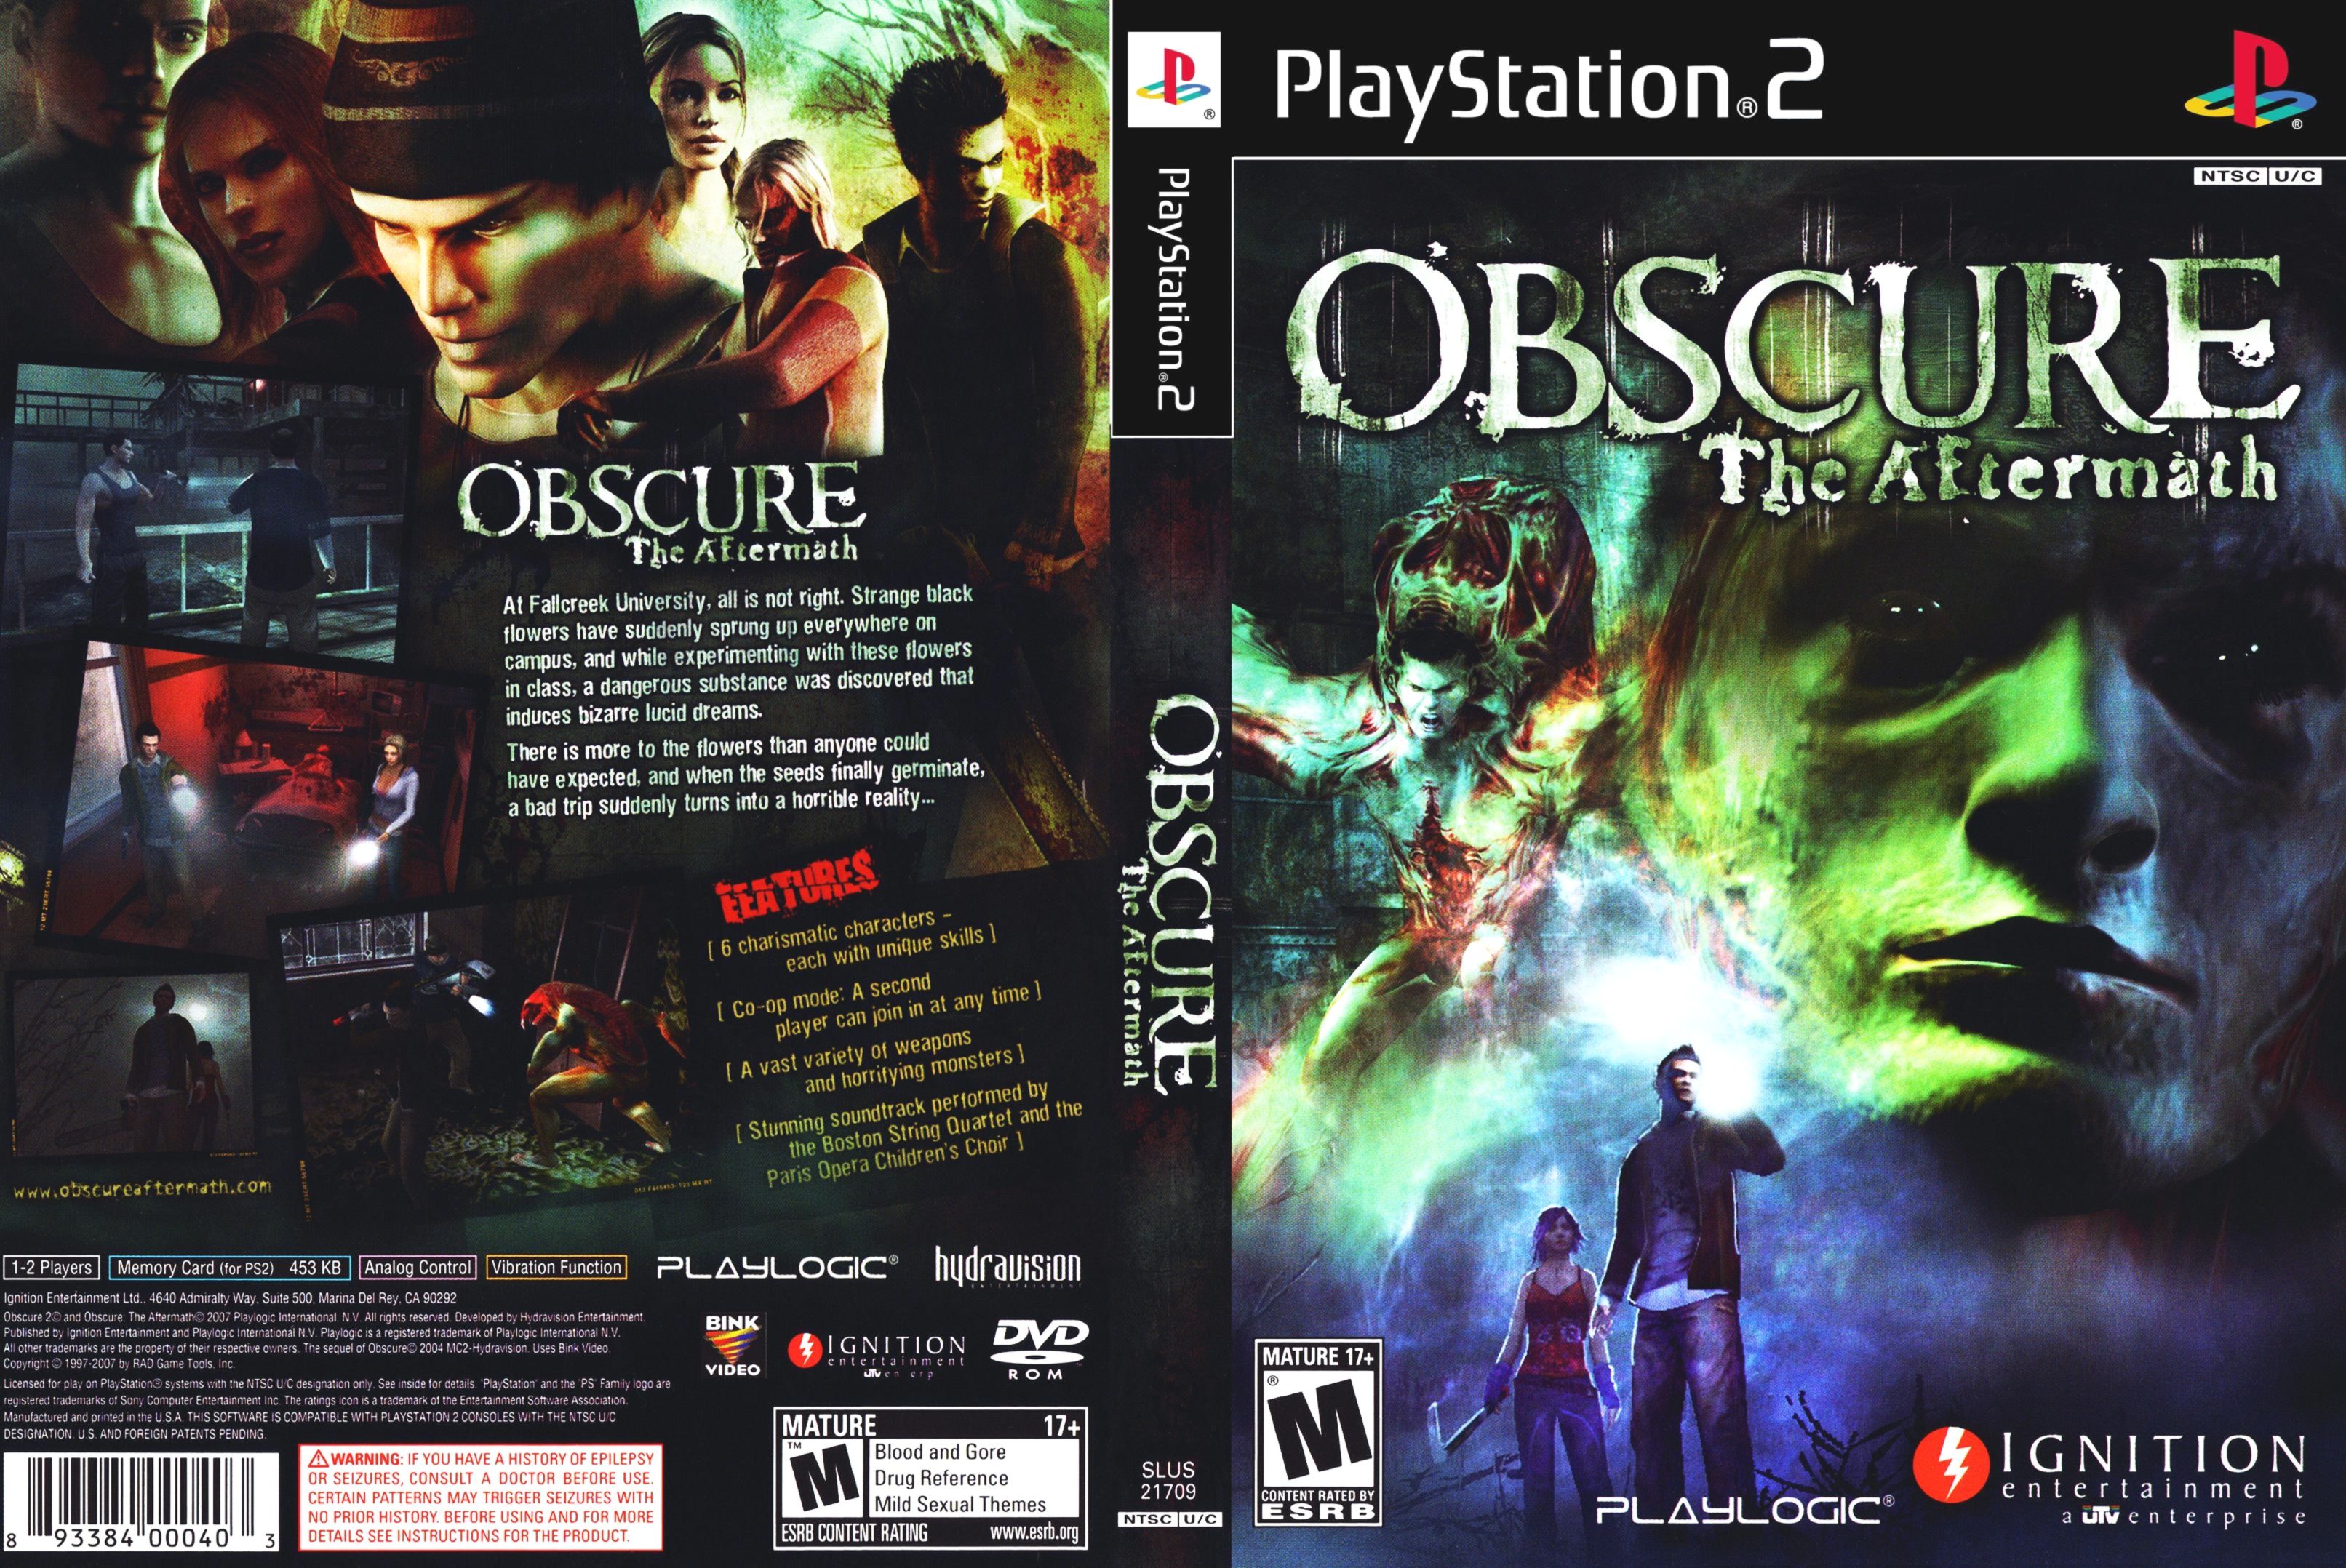 Obscure the aftermath. Obscure 2 PS 2 диск. Obscure: the Aftermath ps2 обложка. Obscure 2 ps2 обложка.